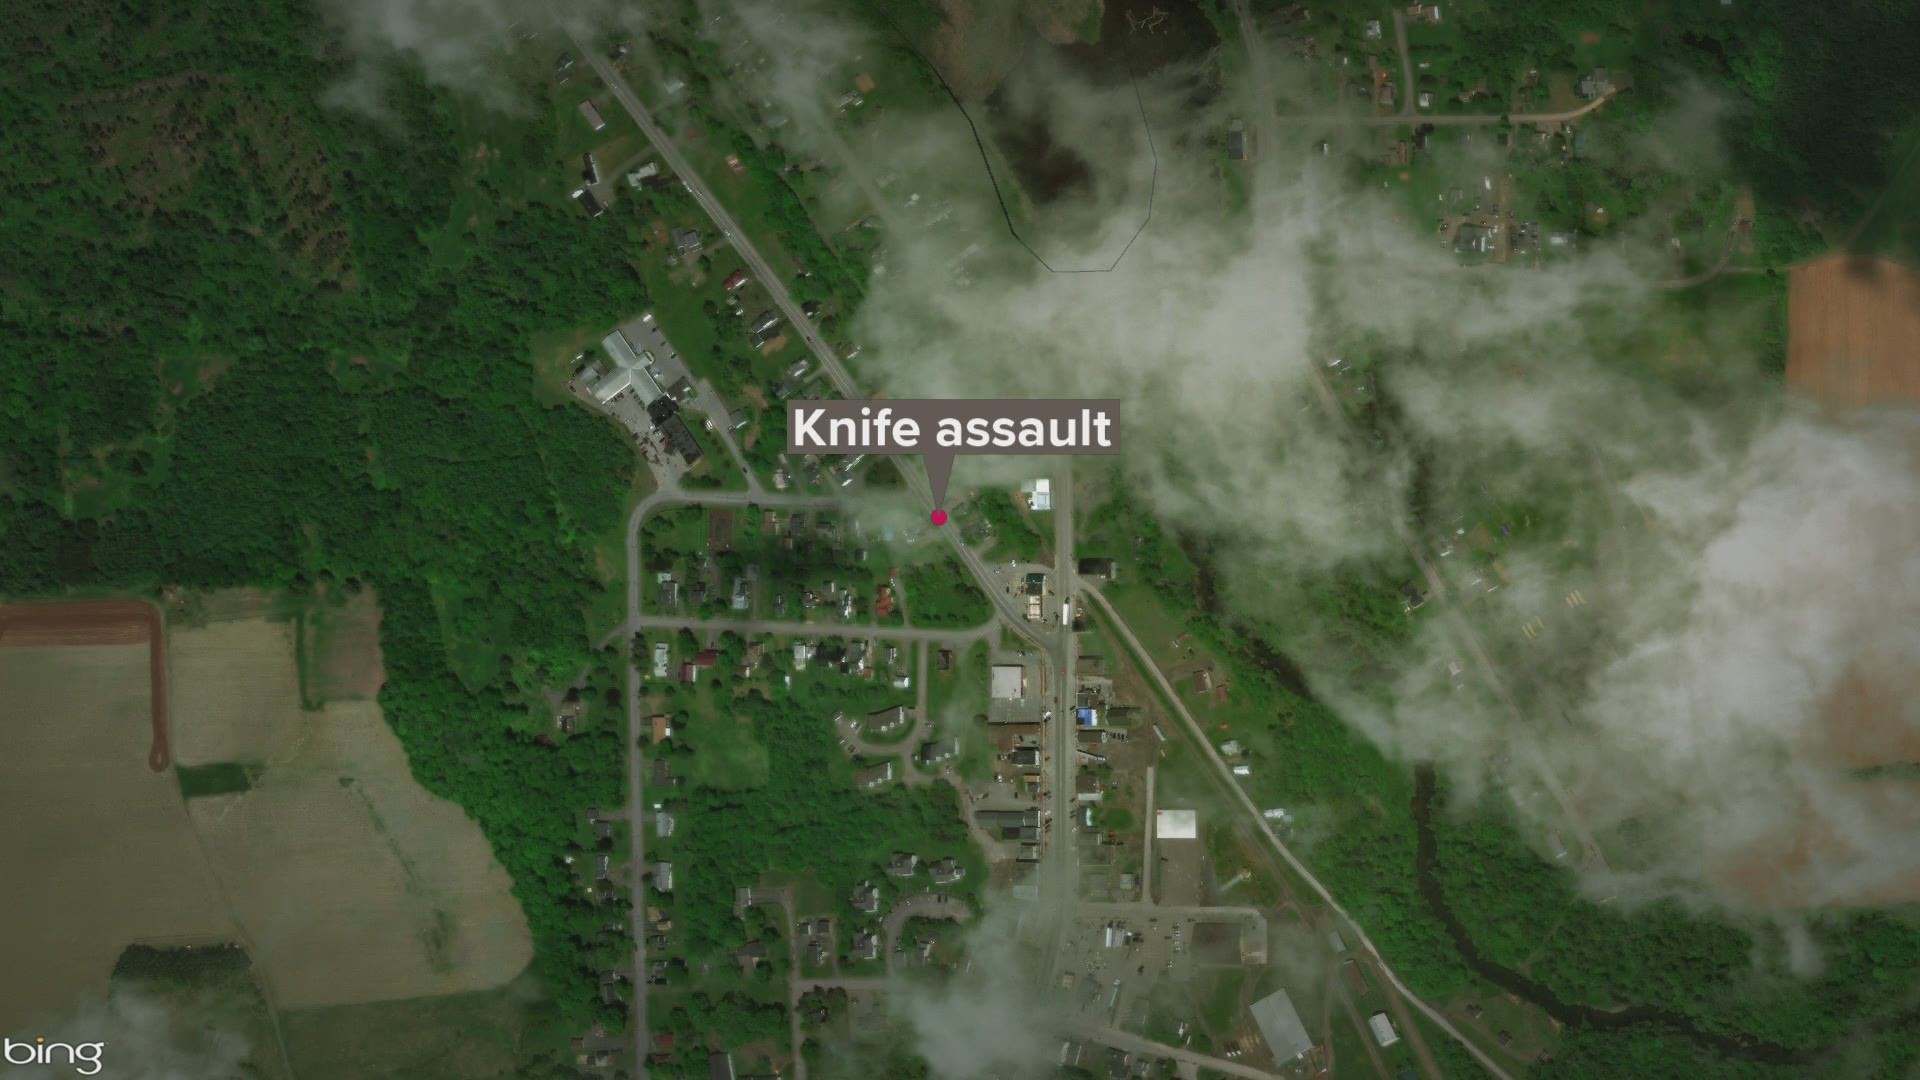 A man from Aroostook County us behind bars Sunday night, facing felony charges for attacking another man with a knife.